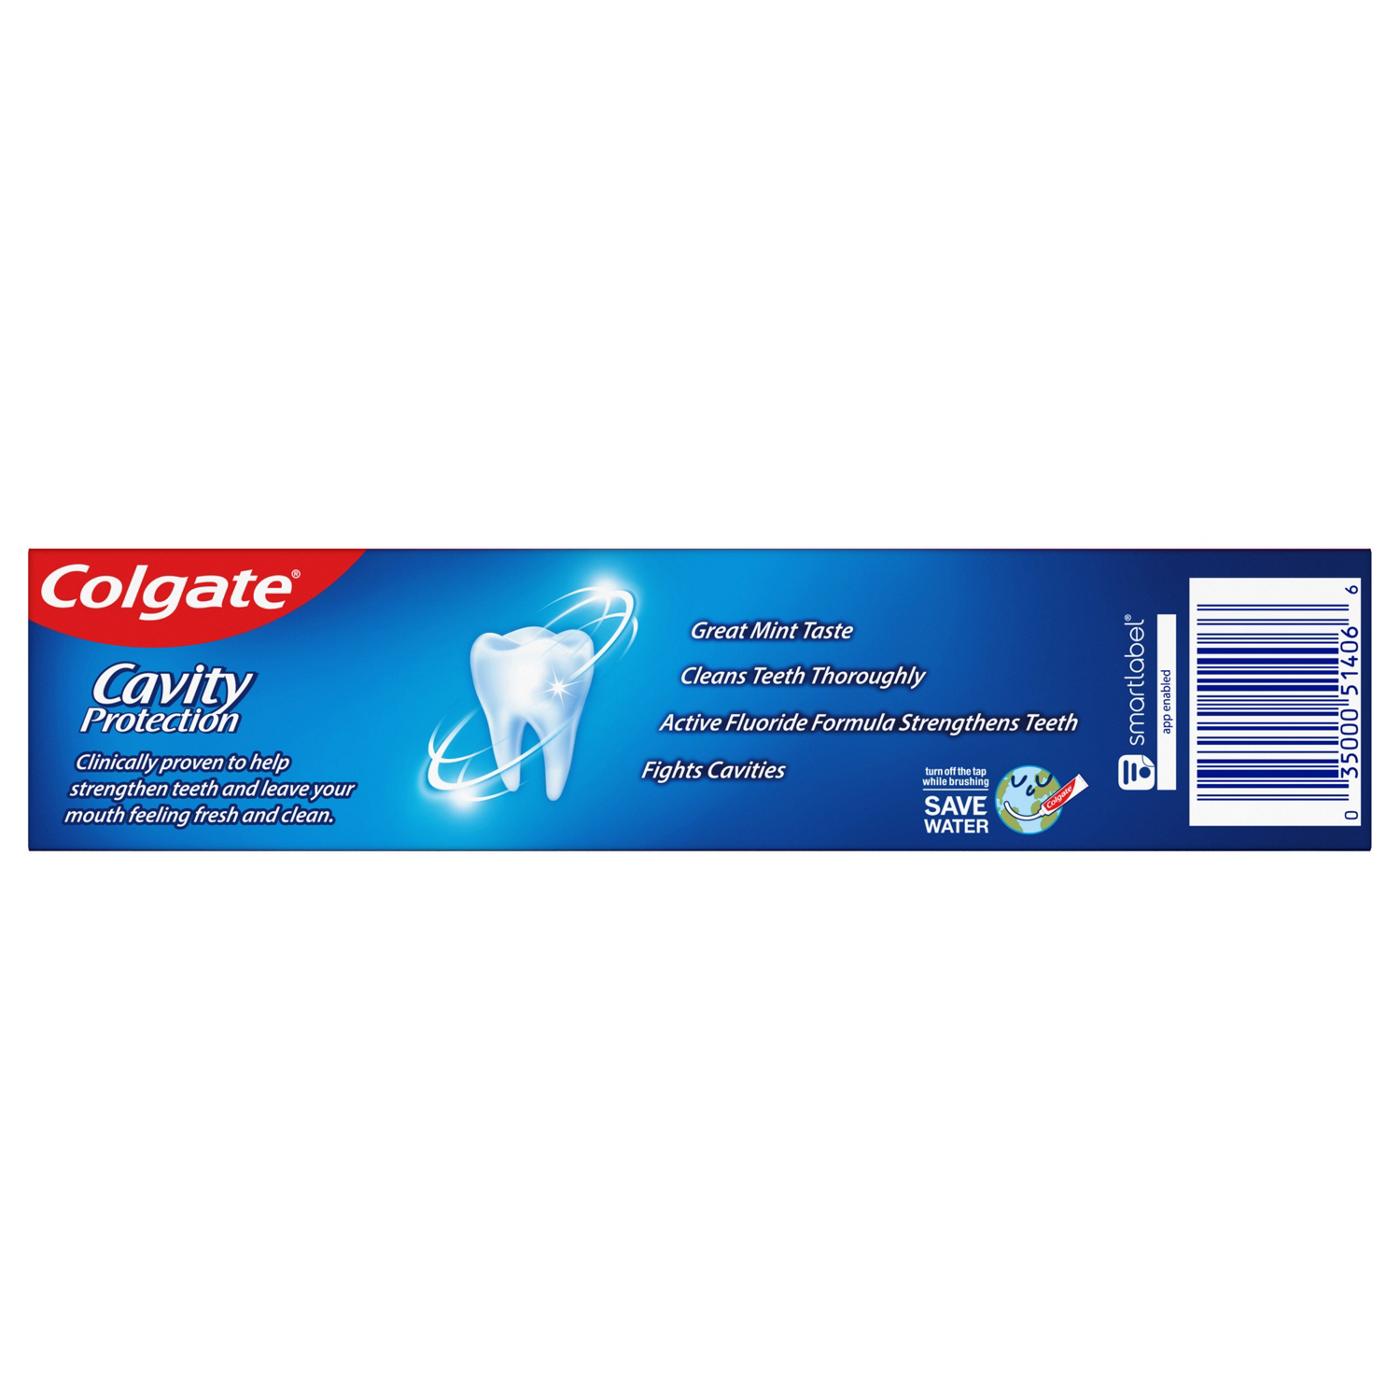 Colgate Cavity Protection Anticavity Toothpaste; image 2 of 2